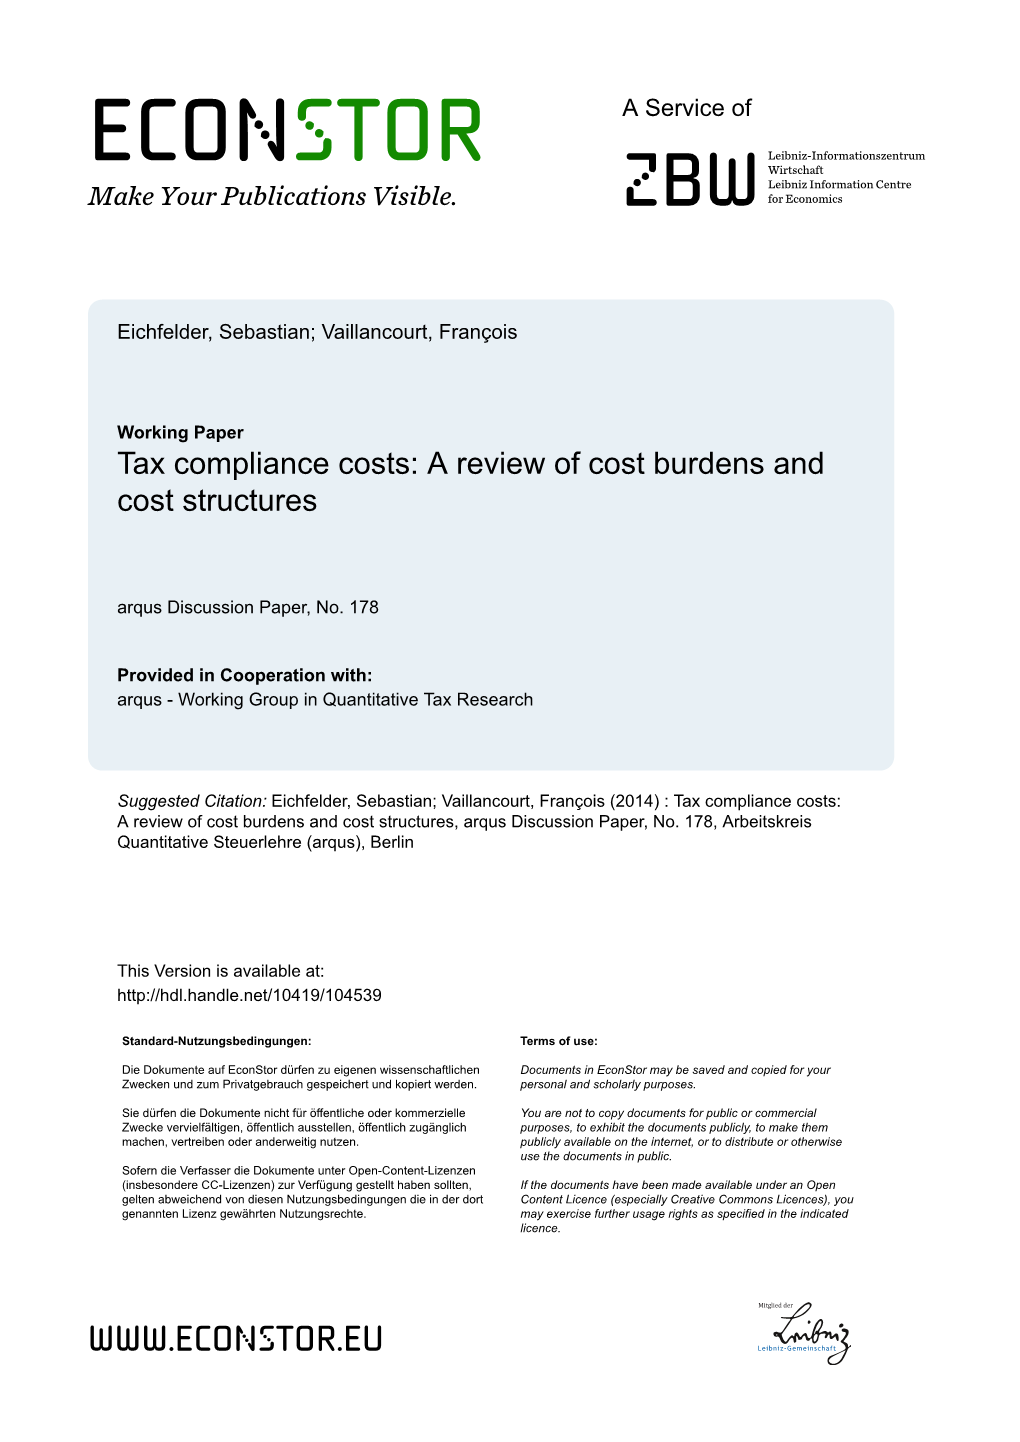 Tax Compliance Costs: a Review of Cost Burdens and Cost Structures